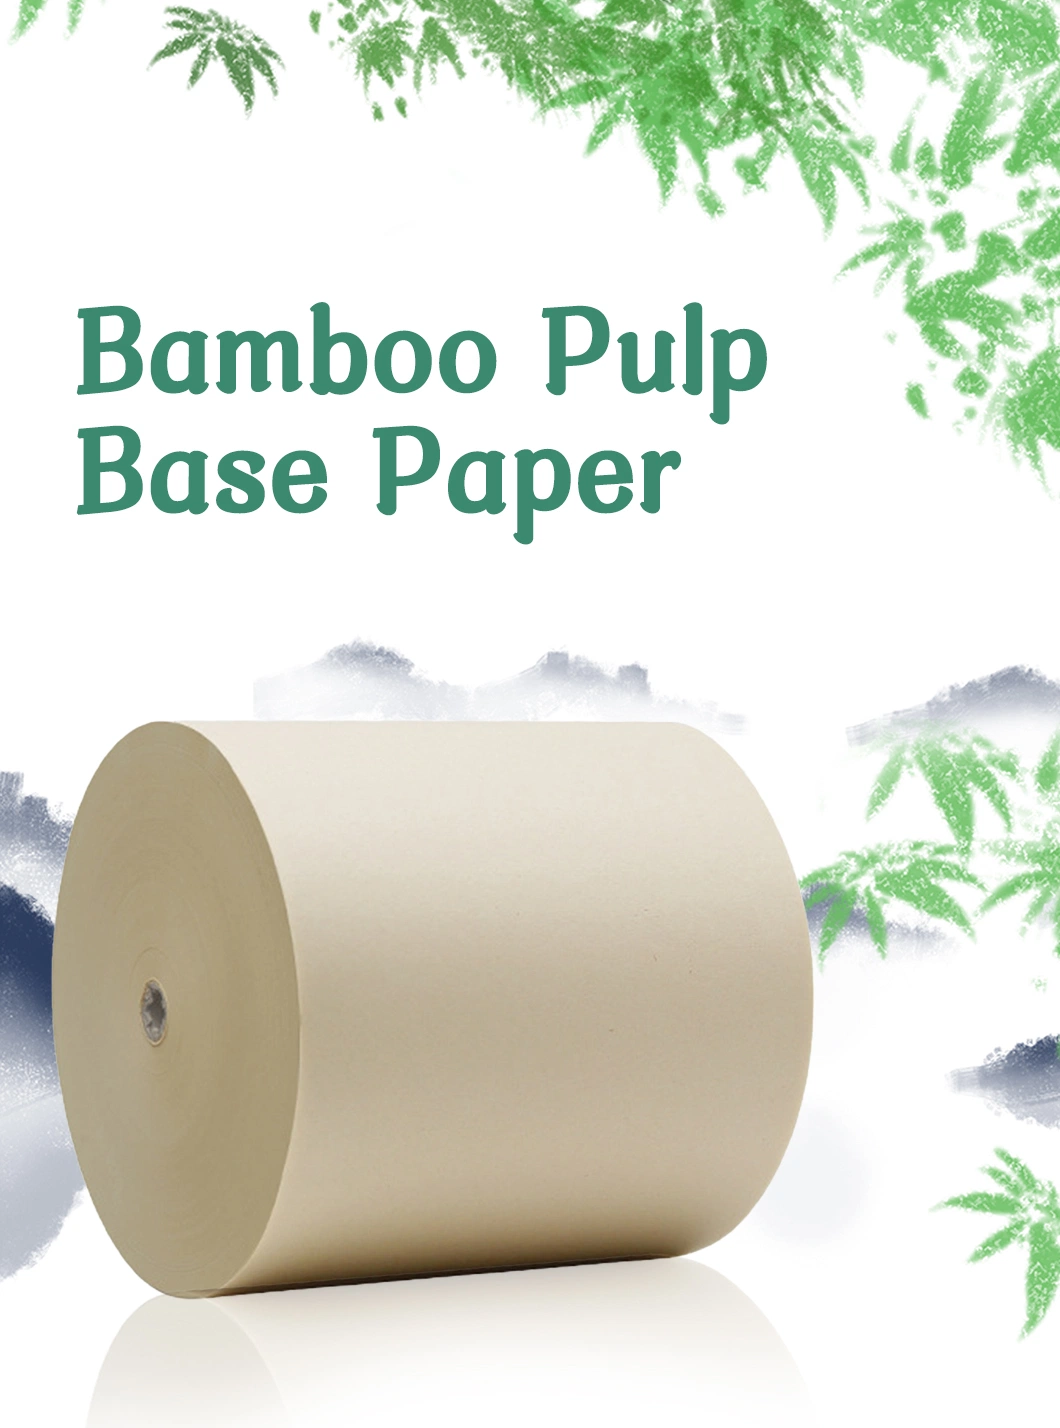 Bamboo Paper Material Customized Bleached / Unbleached Jumbo Roll Tissue Toilet Paper 2ply